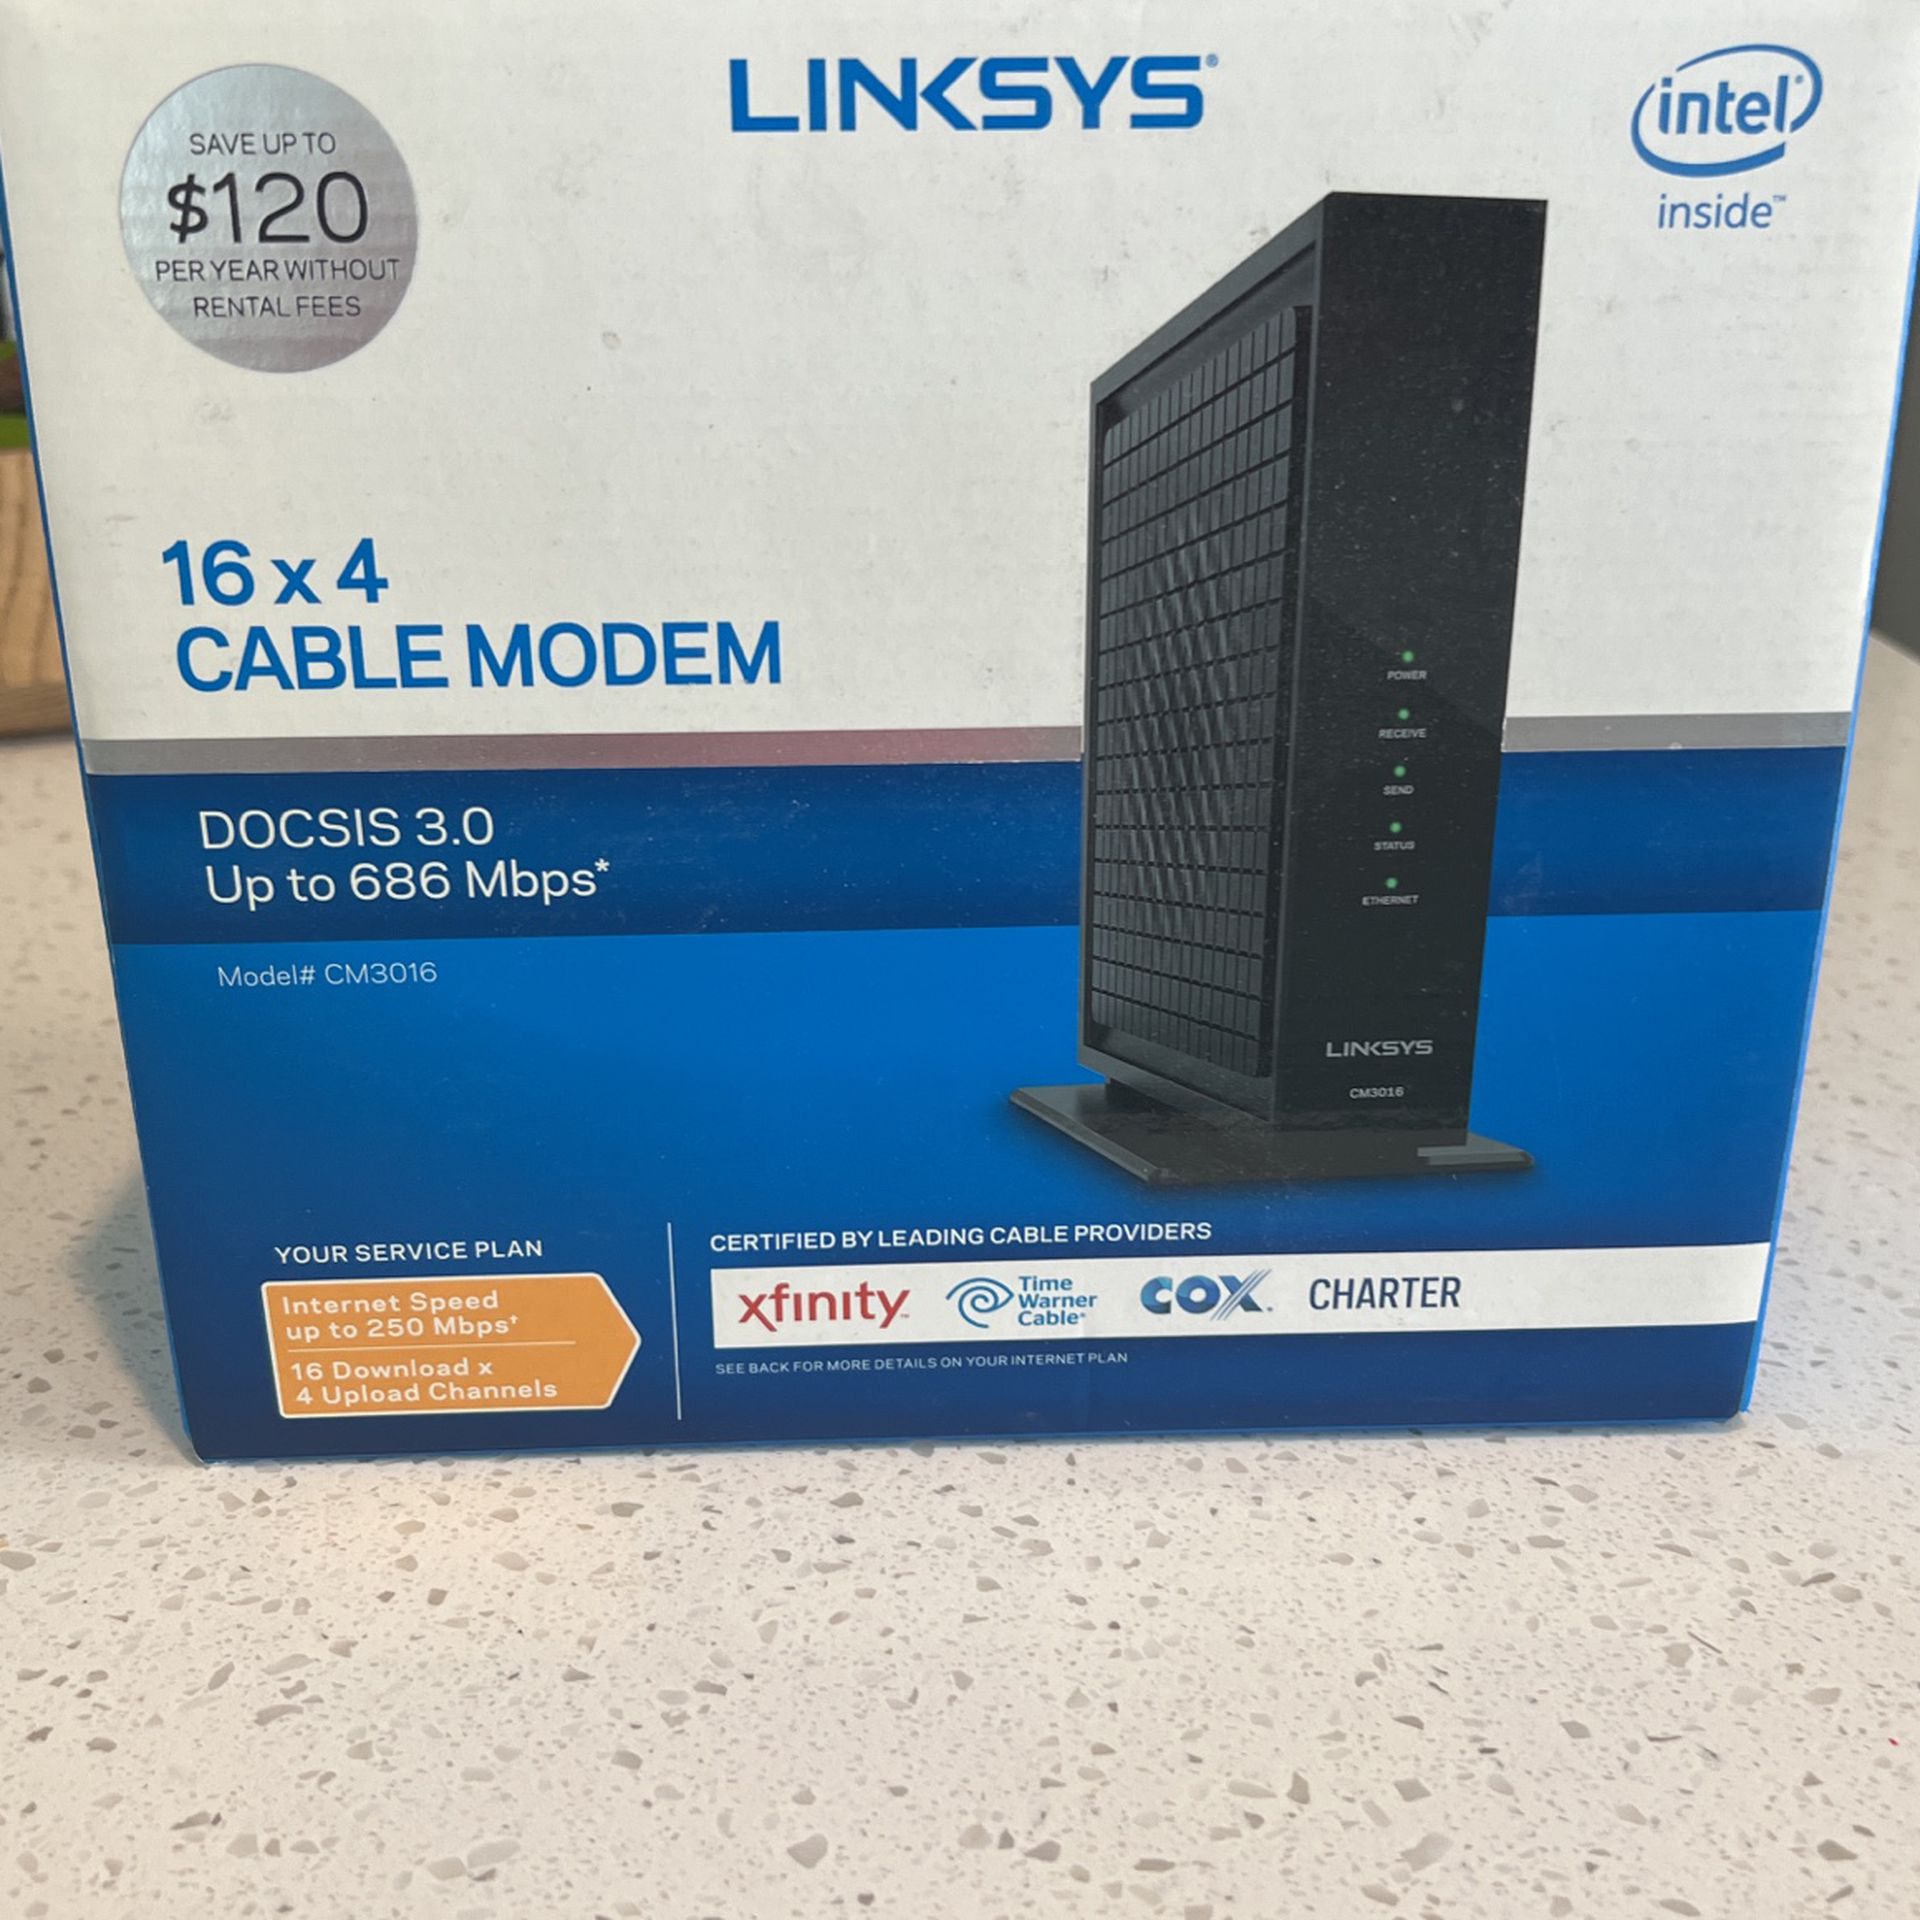 Linksys 16x4 Cable Modem By intel